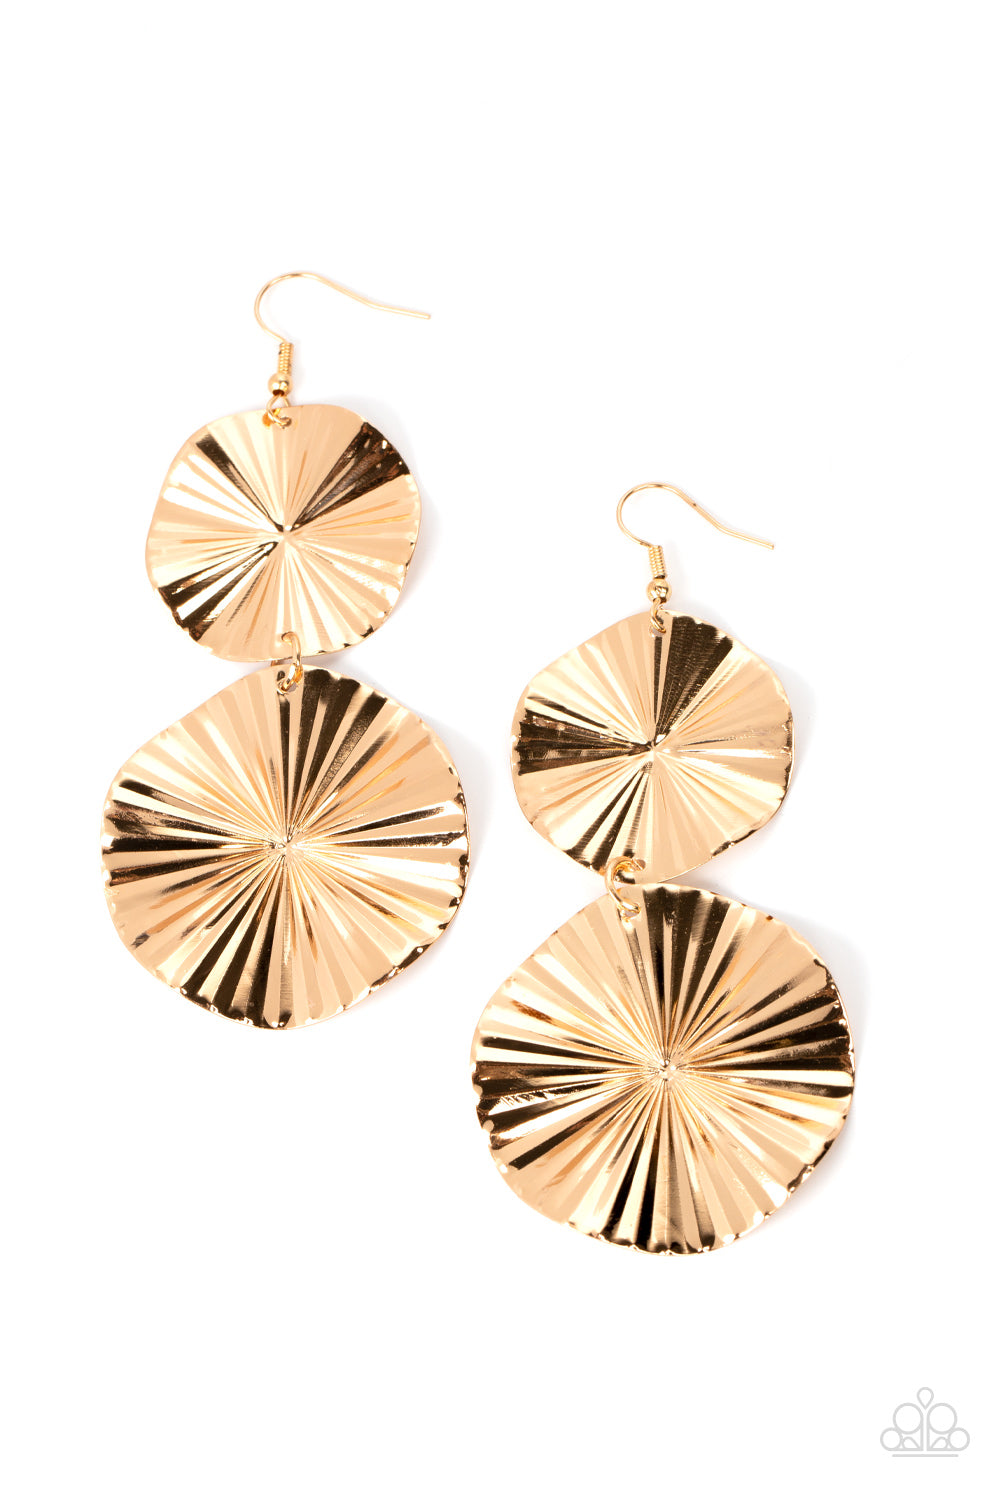 In Your Wildest FAN-tasy Gold Earring - Paparazzi Accessories  Crinkled with texture, folded gold discs radiate as they delicately link into a tactile lure for a stunning metallic finish. Earring attaches to a standard fishhook fitting.  Featured inside The Preview at GLOW! Sold as one pair of earrings.  New KitNew Kit"